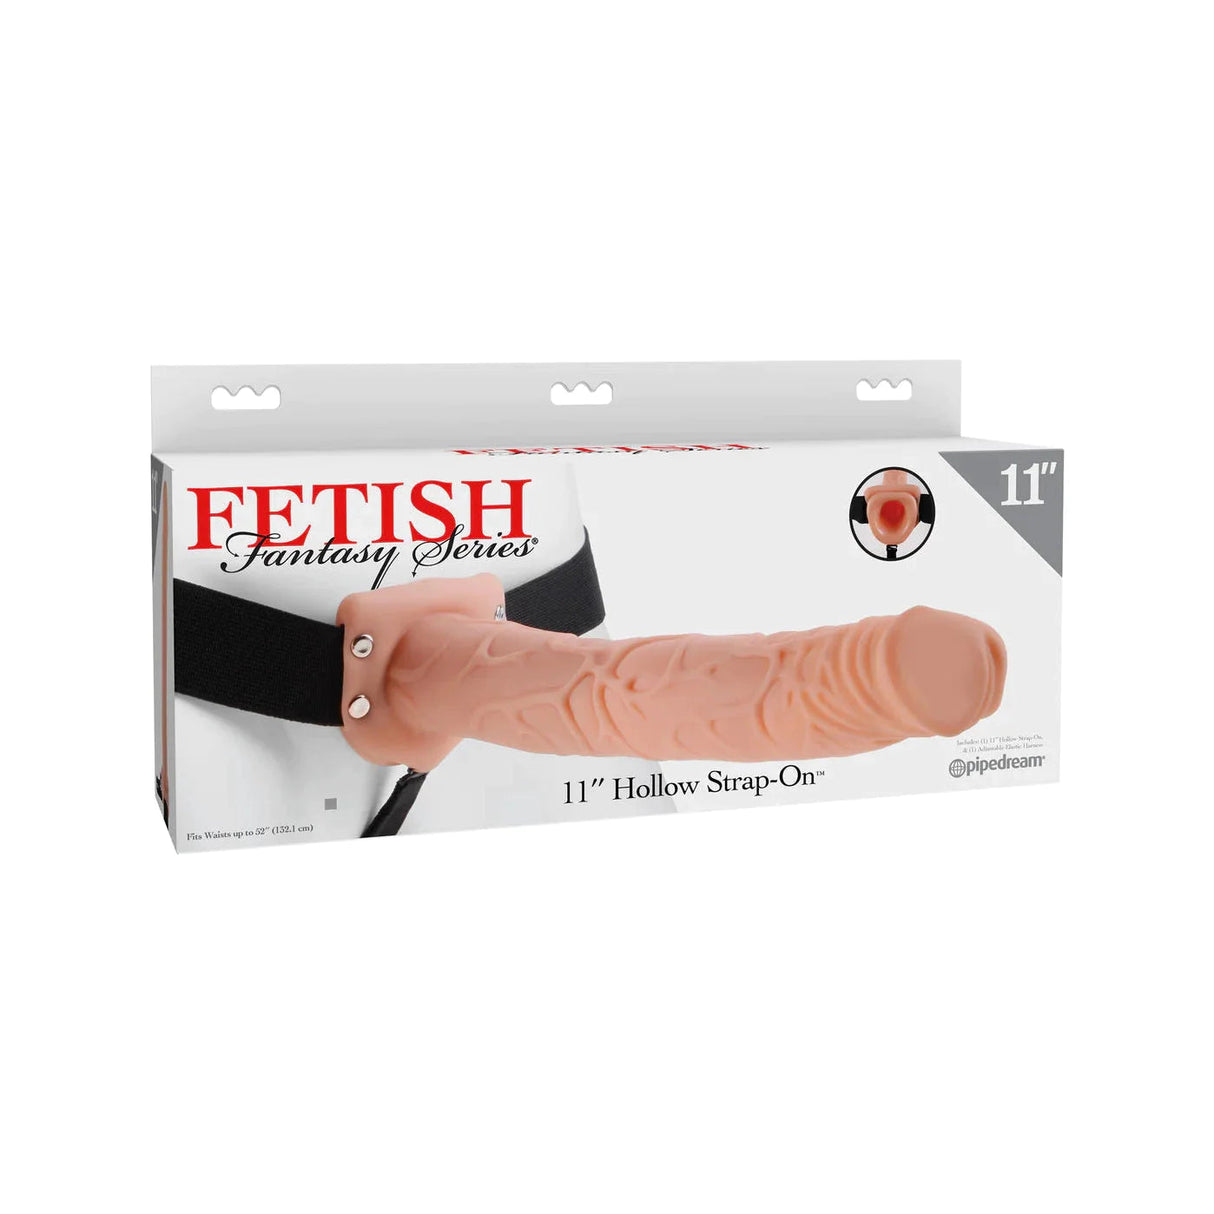 Fetish Fantasy Series Hollow Strap-On for ED